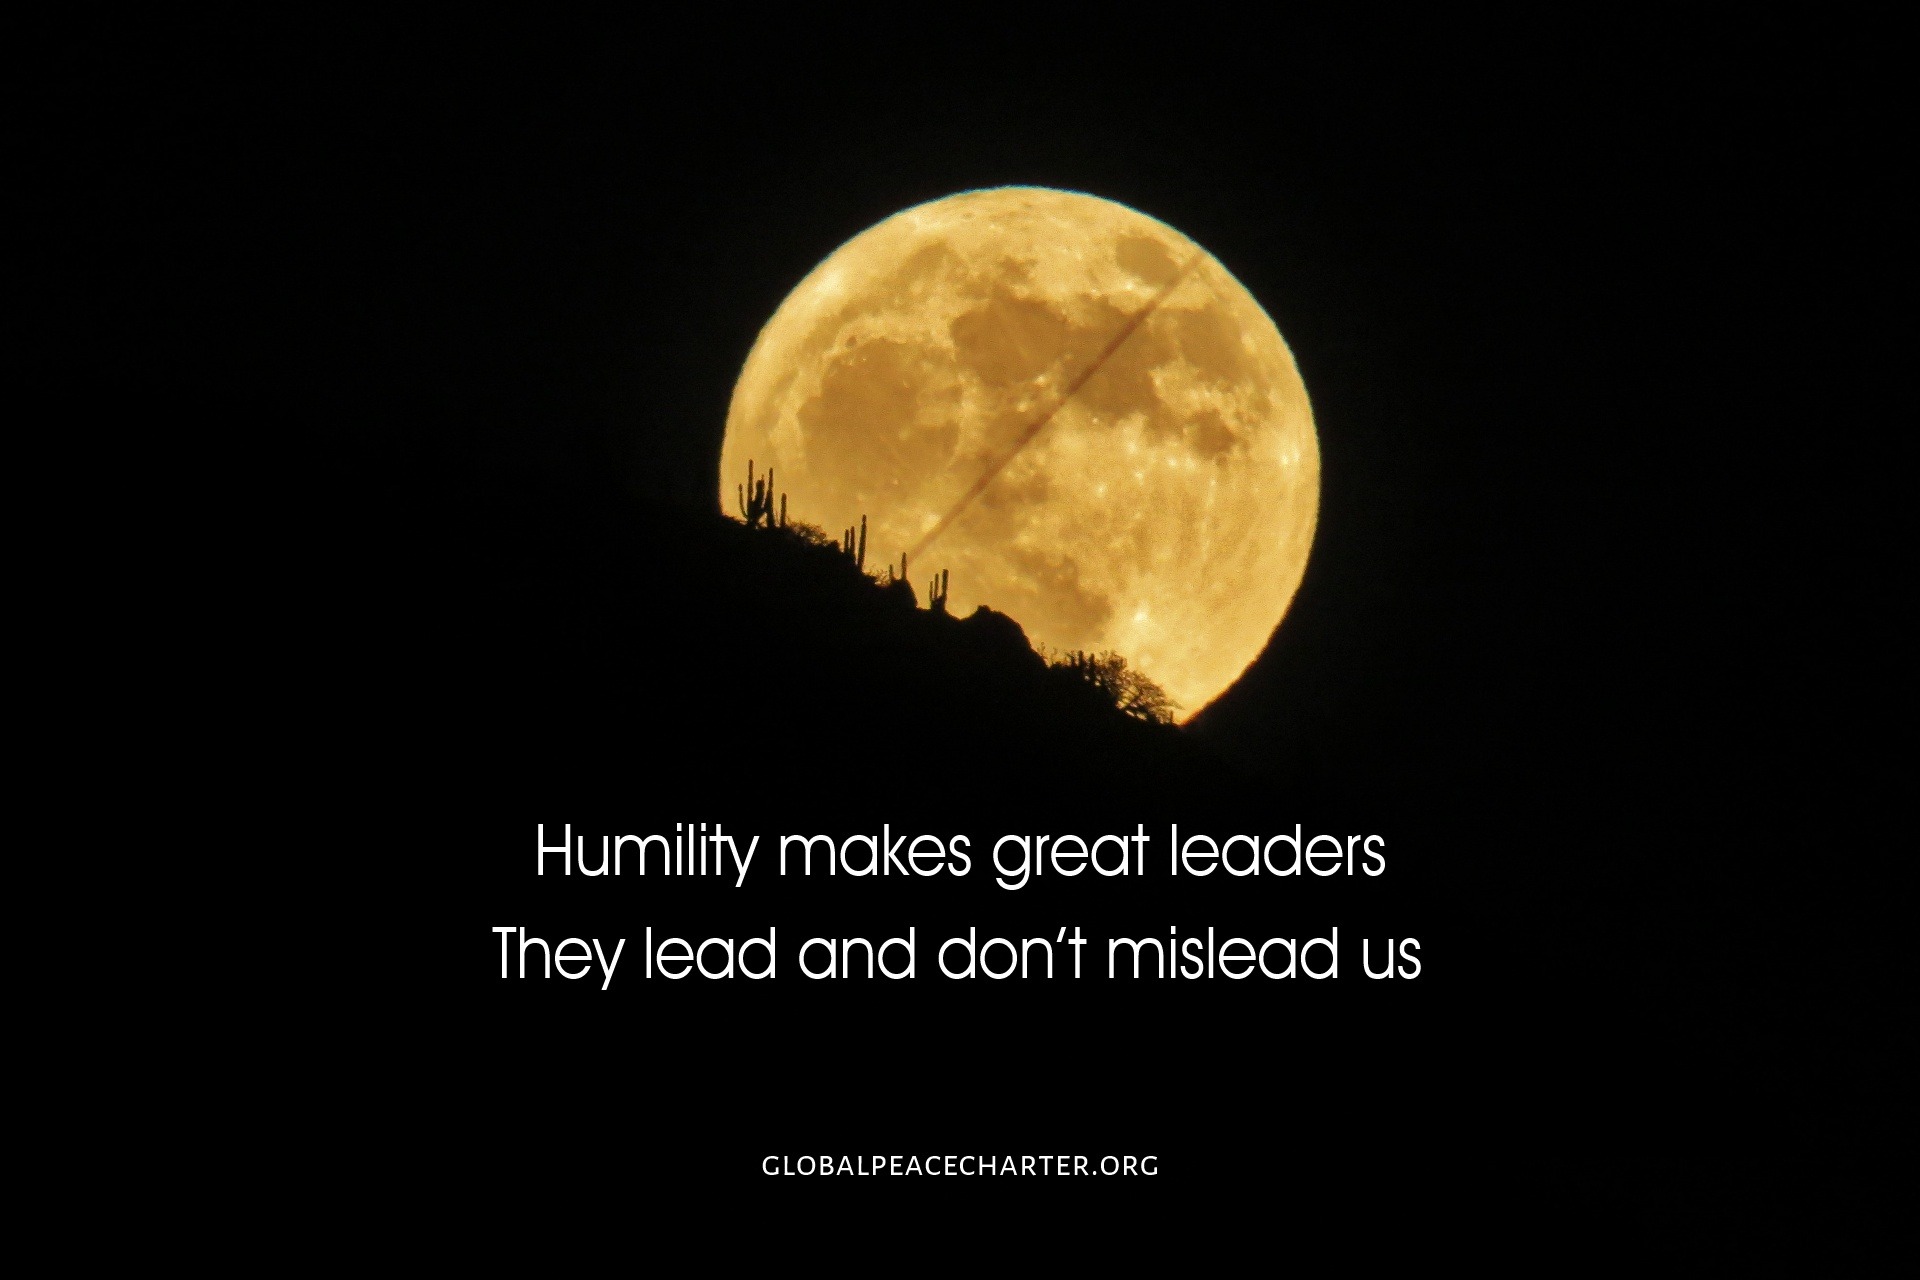 Great in humility